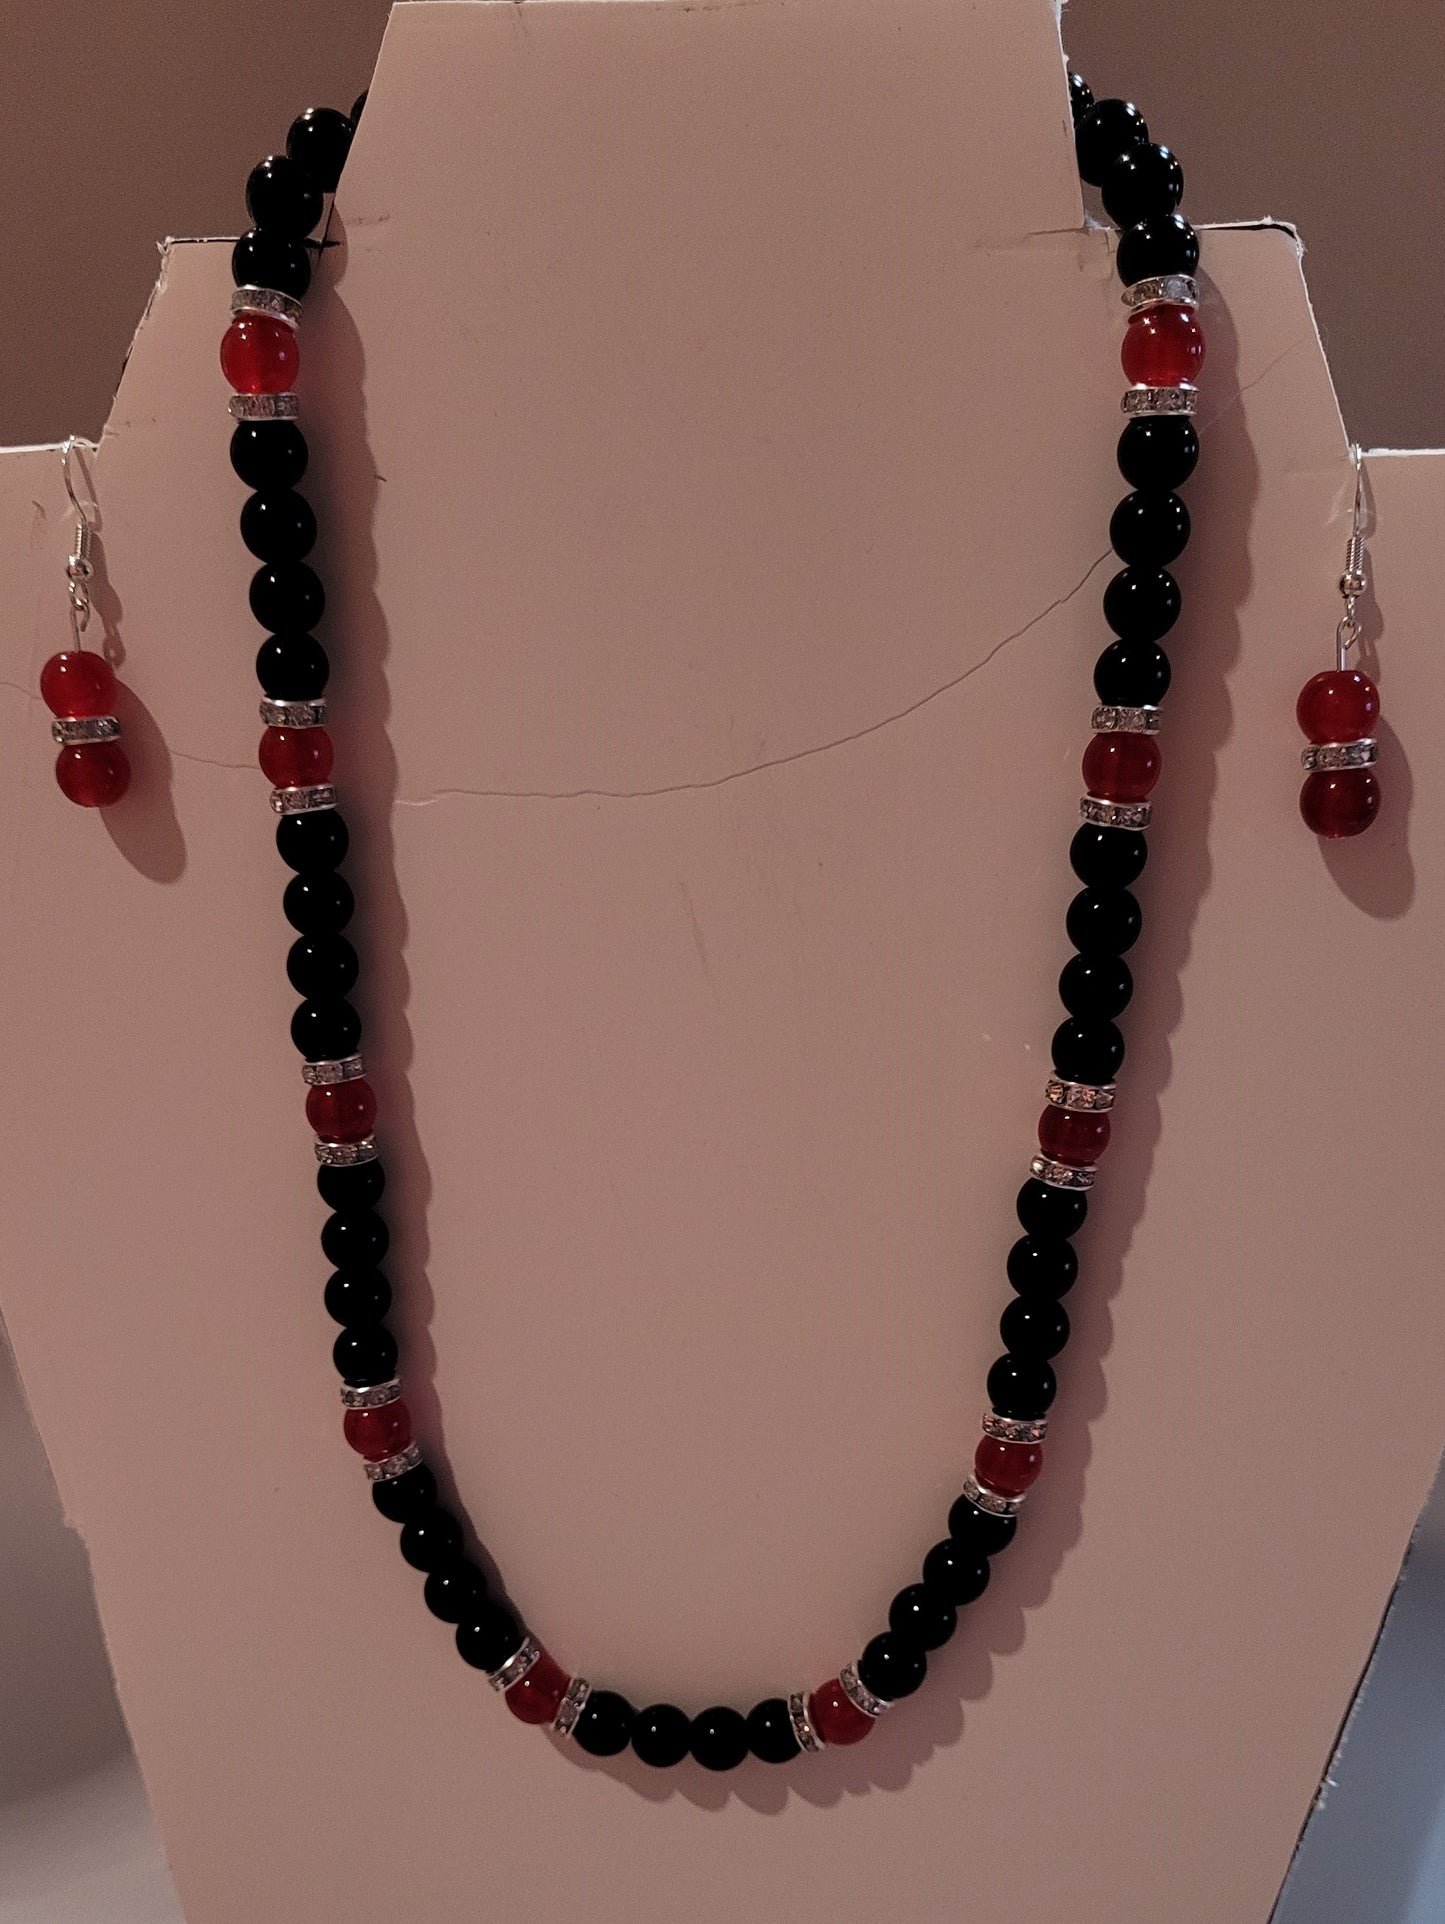 Black and Red Czech Glass Beads with Matching Earrings